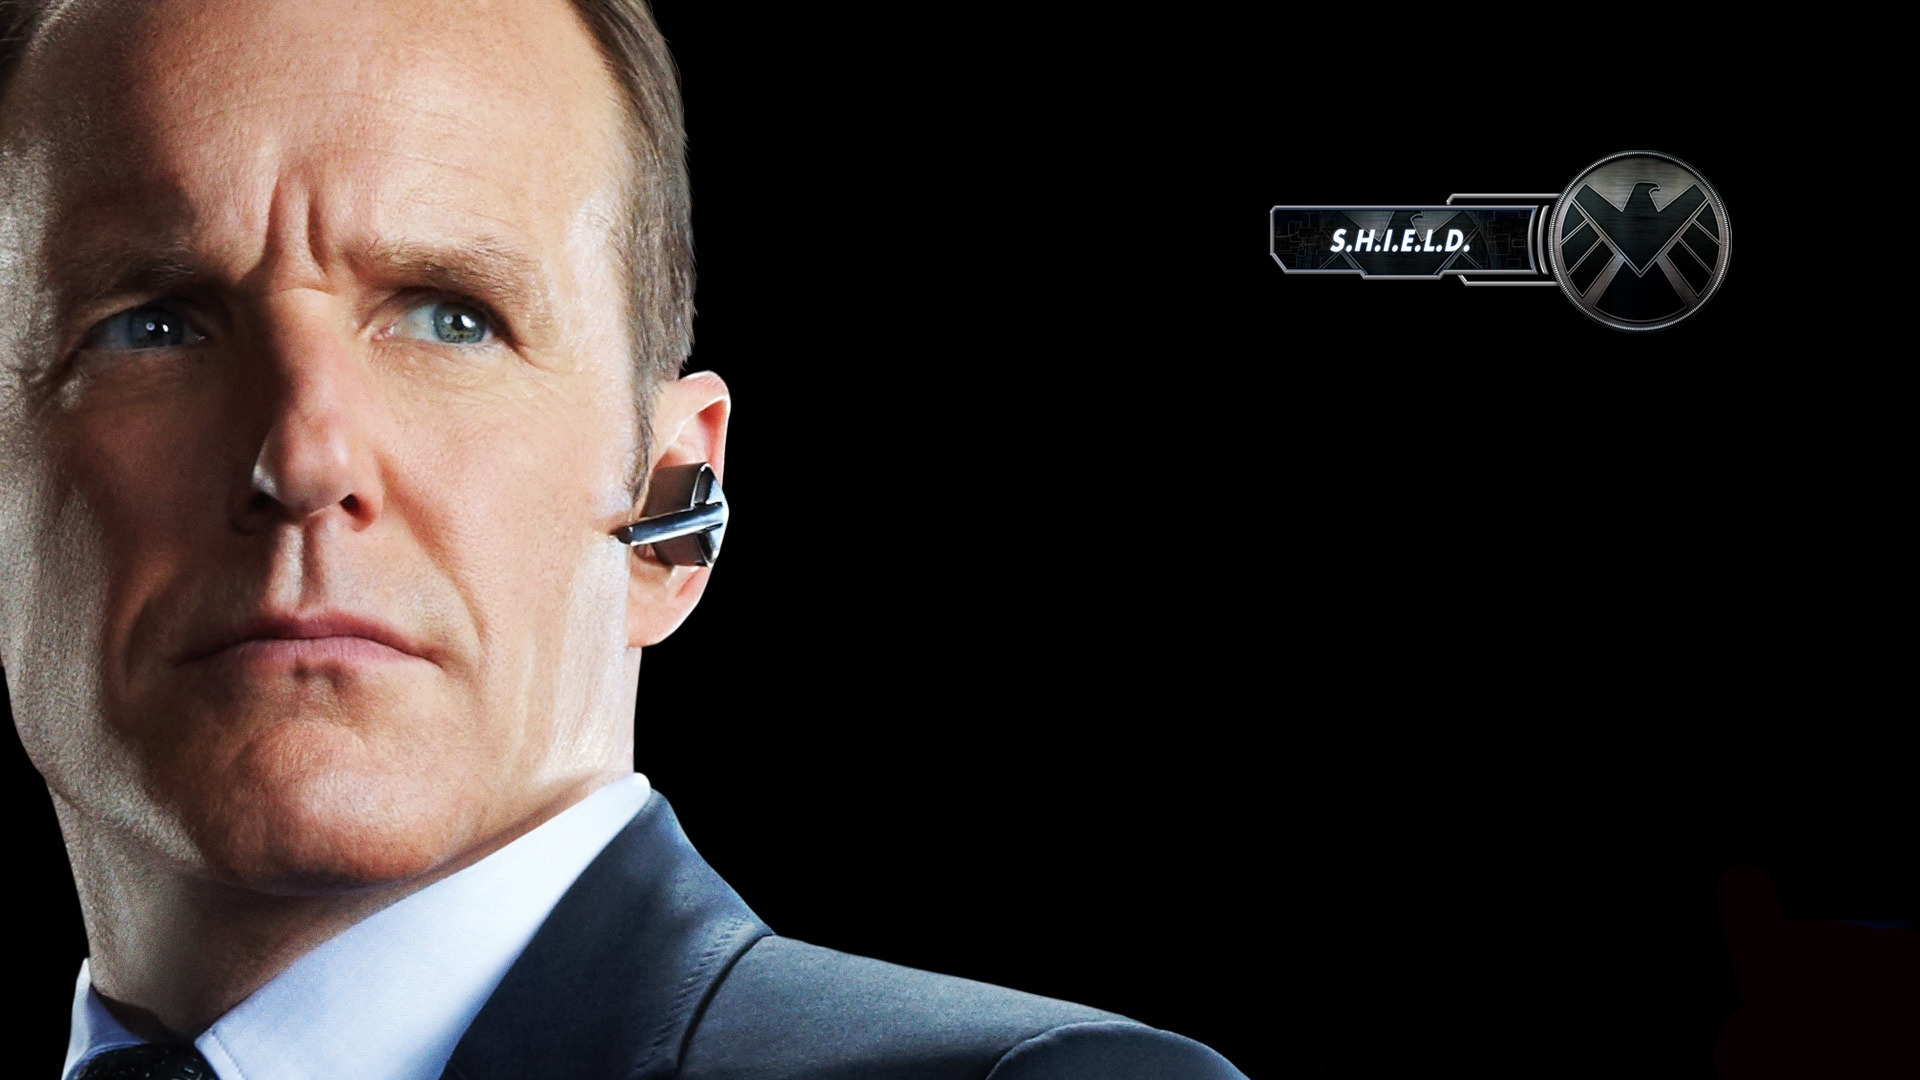 The Avengers Agent Phil Coulson for 1920 x 1080 HDTV 1080p resolution